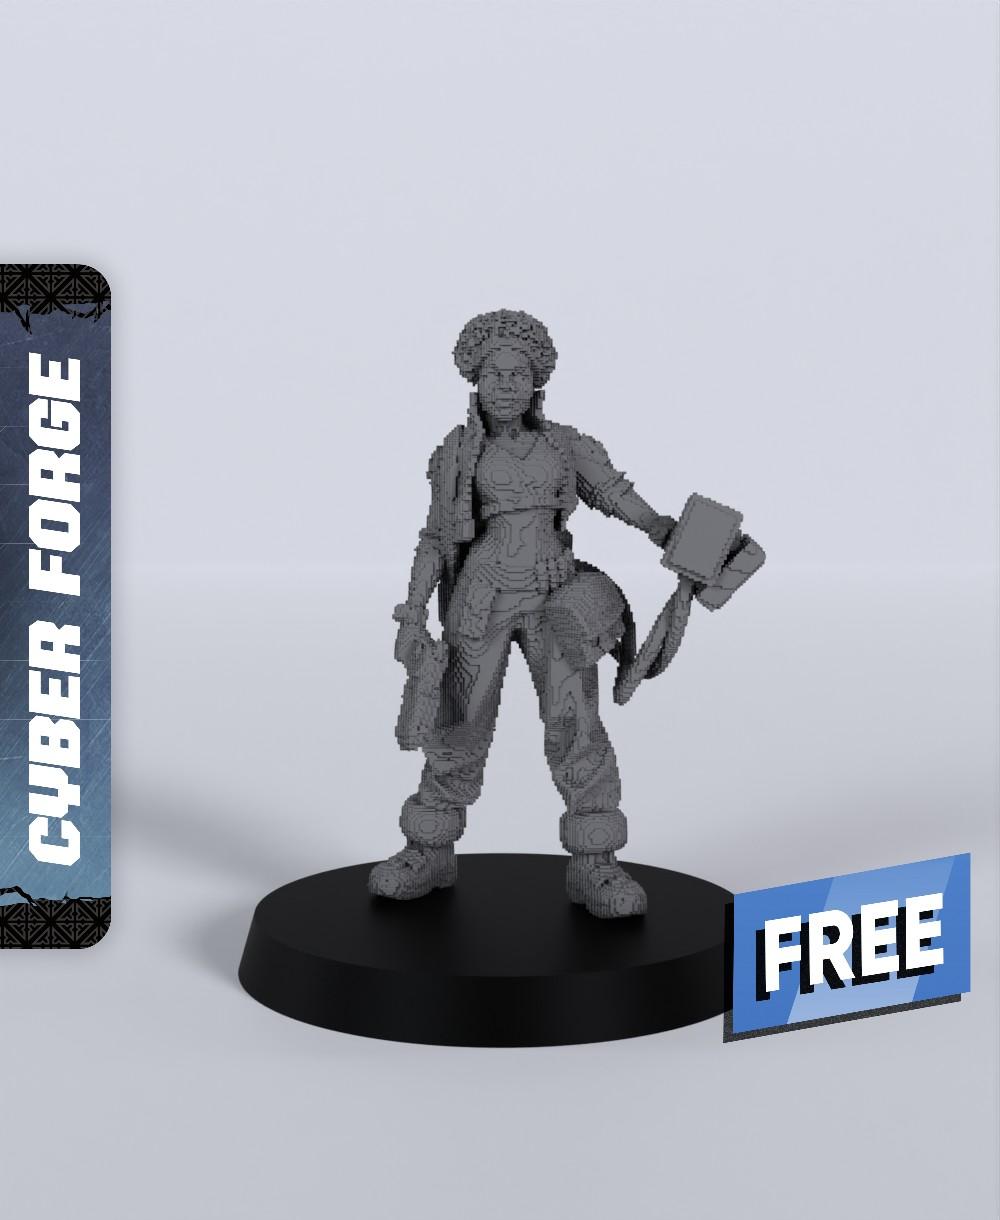 Ajey She in Cyberspace - With Free Cyberpunk Warhammer - 40k Sci-Fi Gift Ideas for RPG and Wargamers 3d model